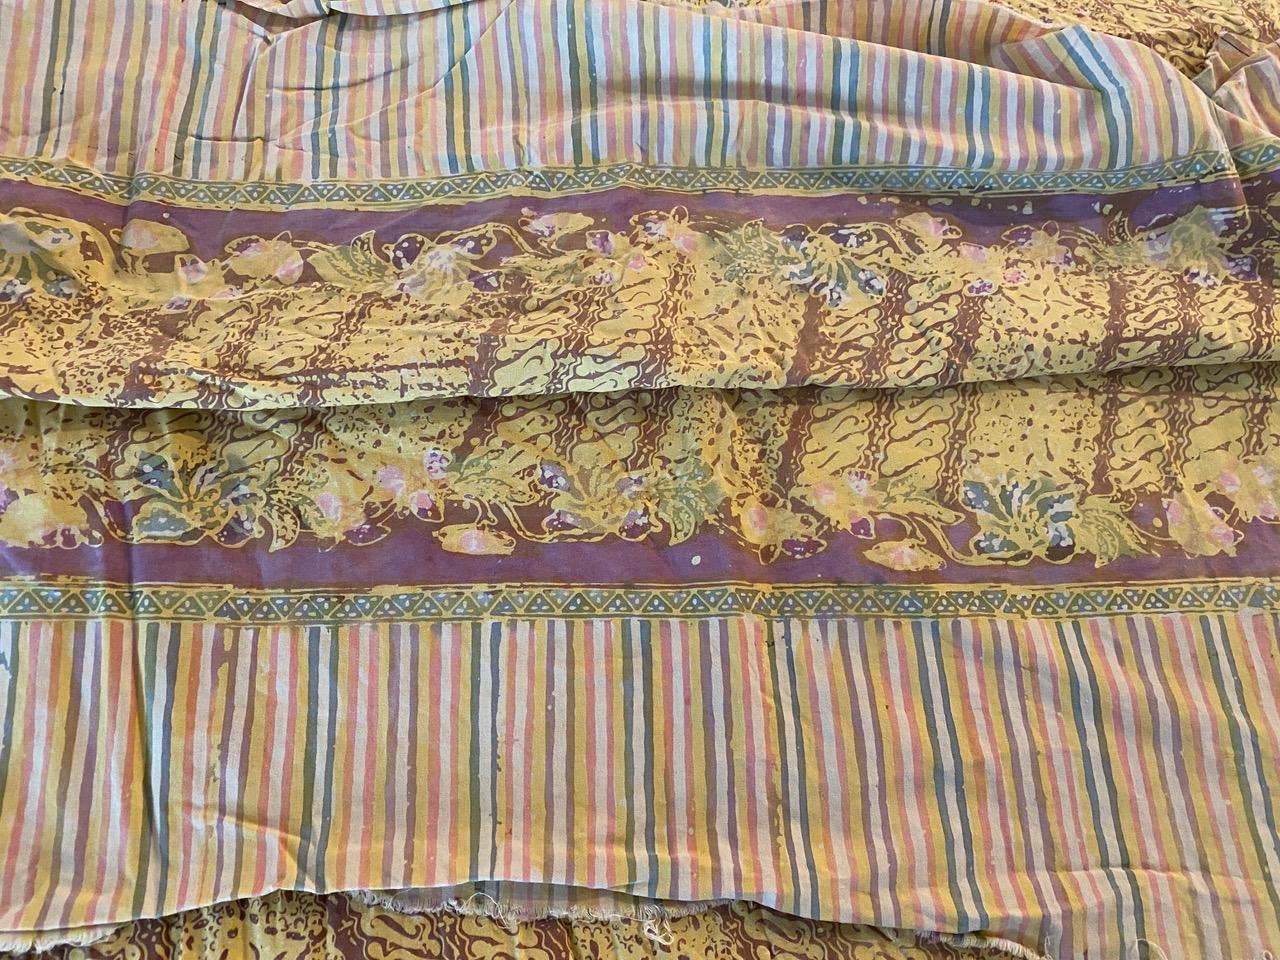 Indonesian Andrianna Shamaris Antique Balinese Ceremonial Sarong For Sale